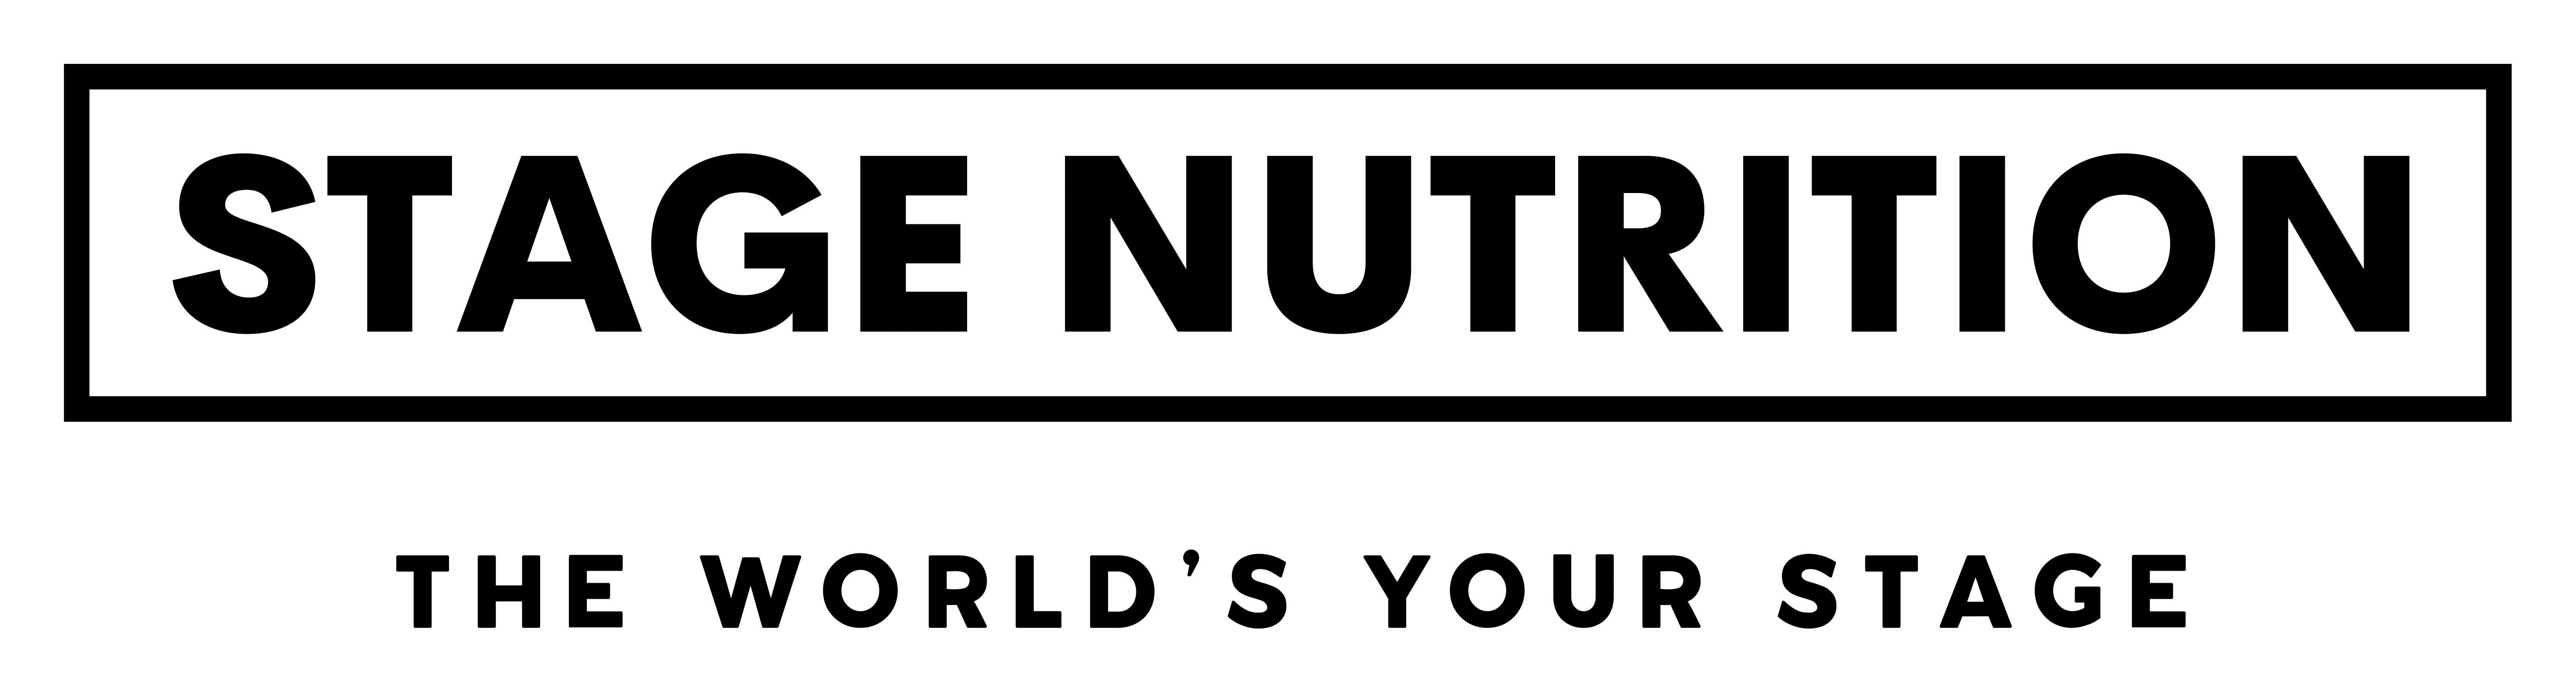  STAGE NUTRITION THE WORLD'S YOUR STAGE